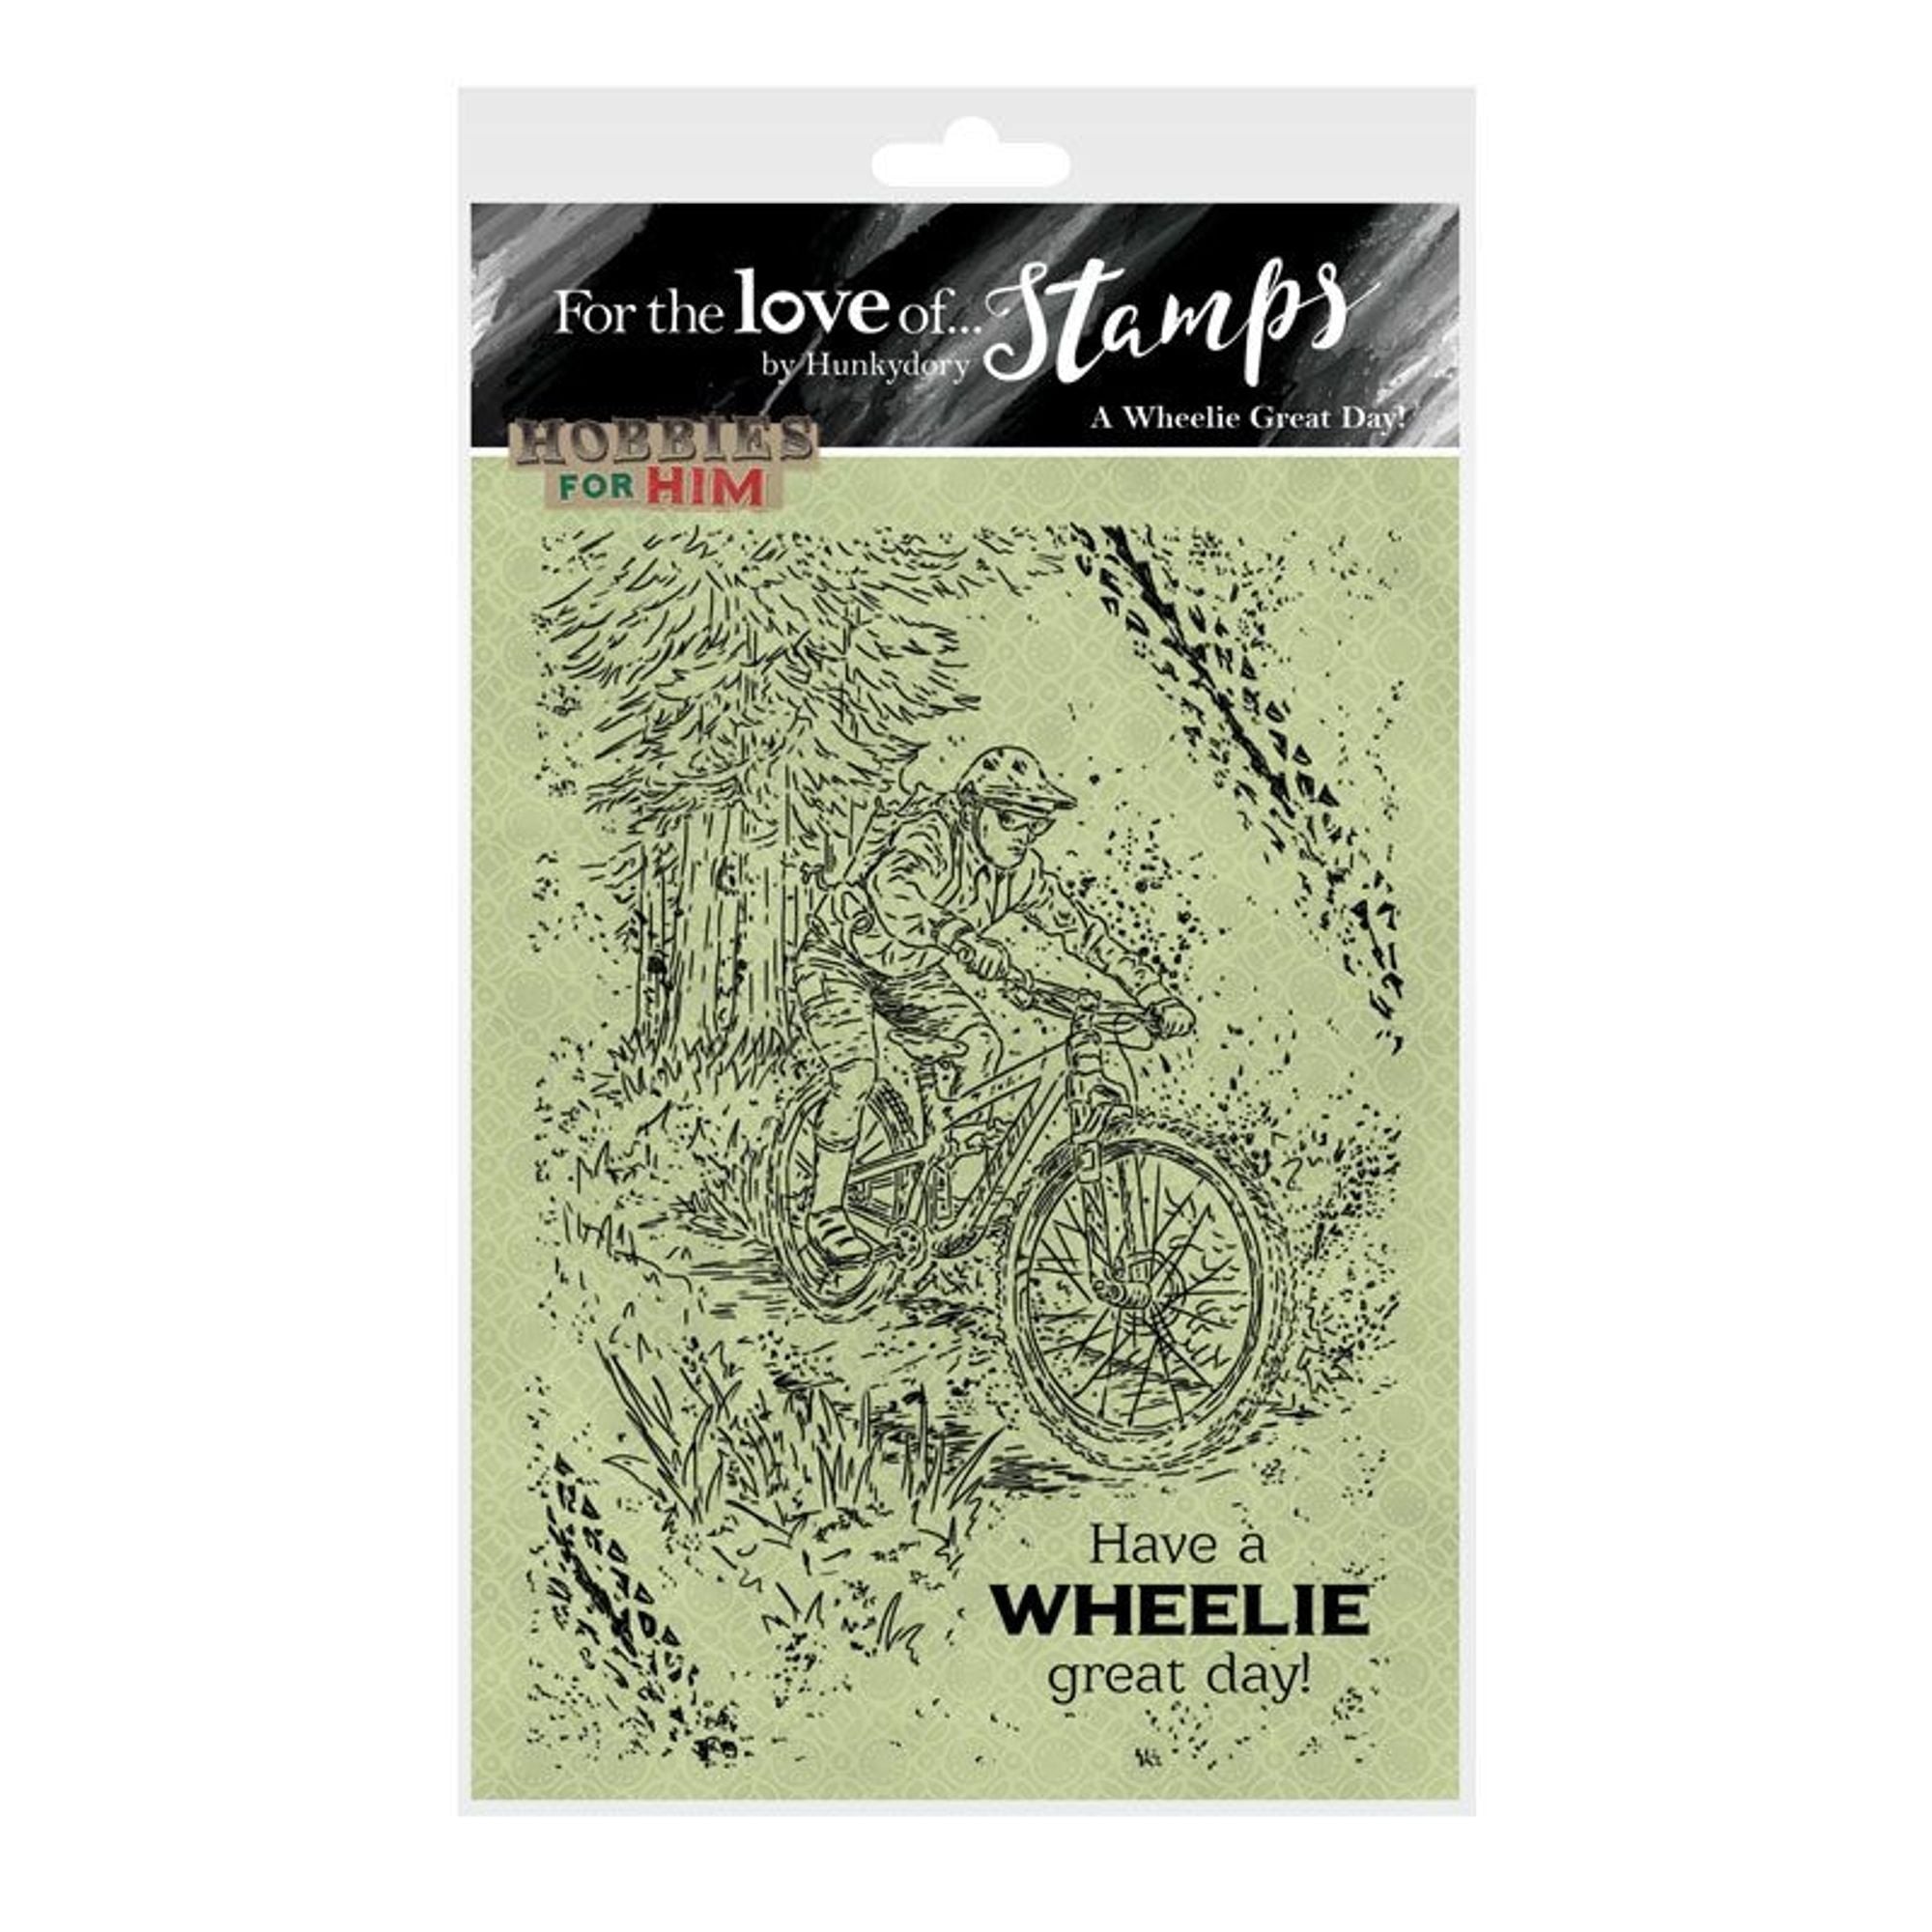 For the Love of Stamps - A Wheelie Great Day! A6 Stamp Set